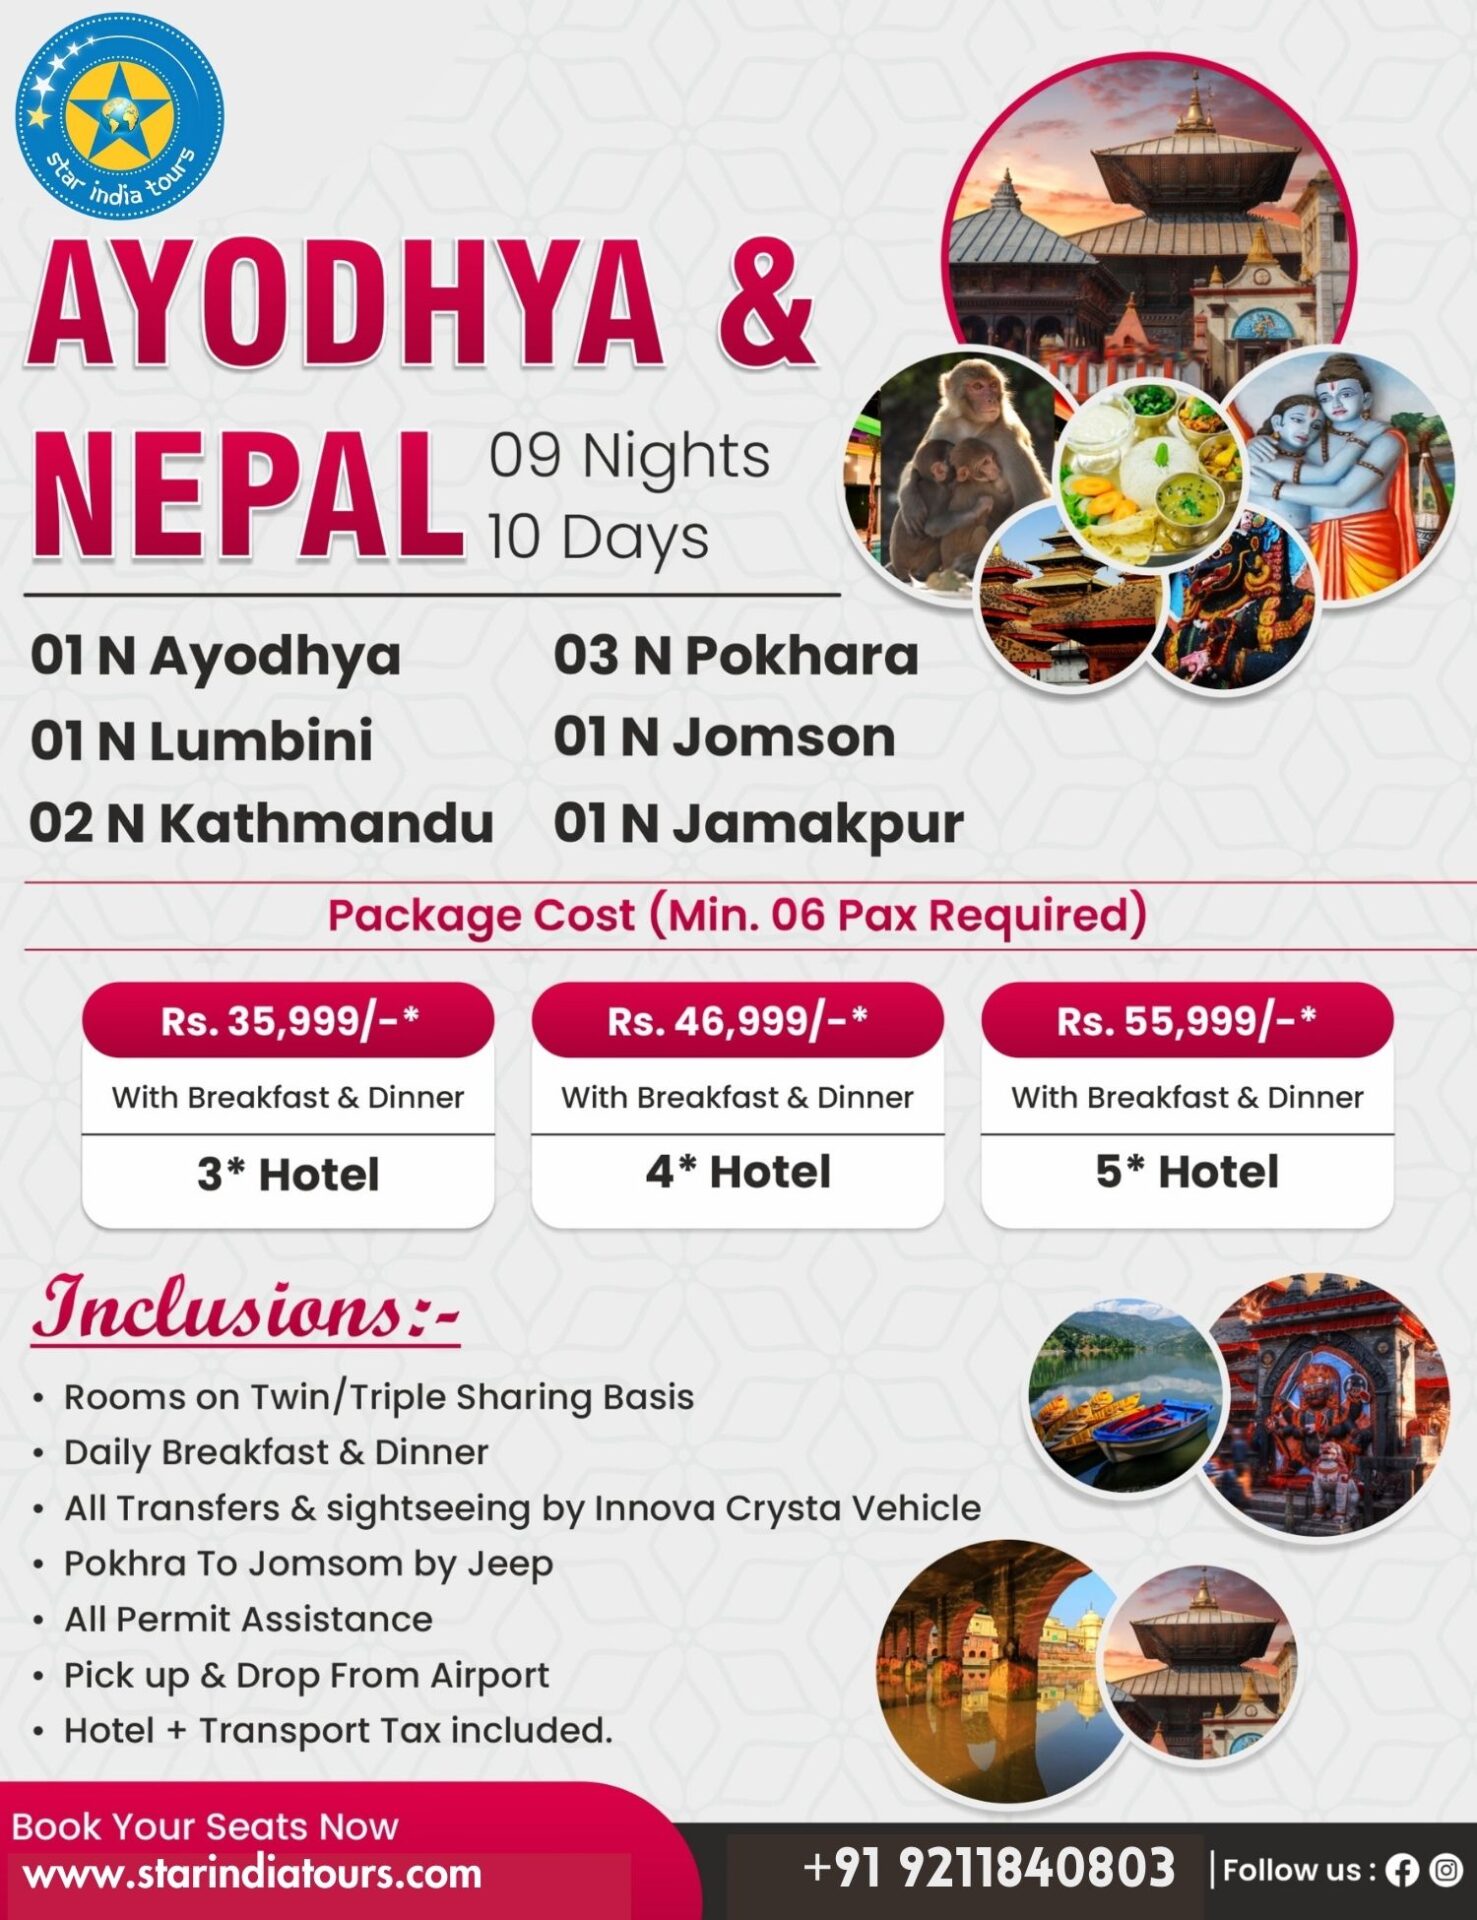 Ayodhya and Nepal: A Journey through History and Culture